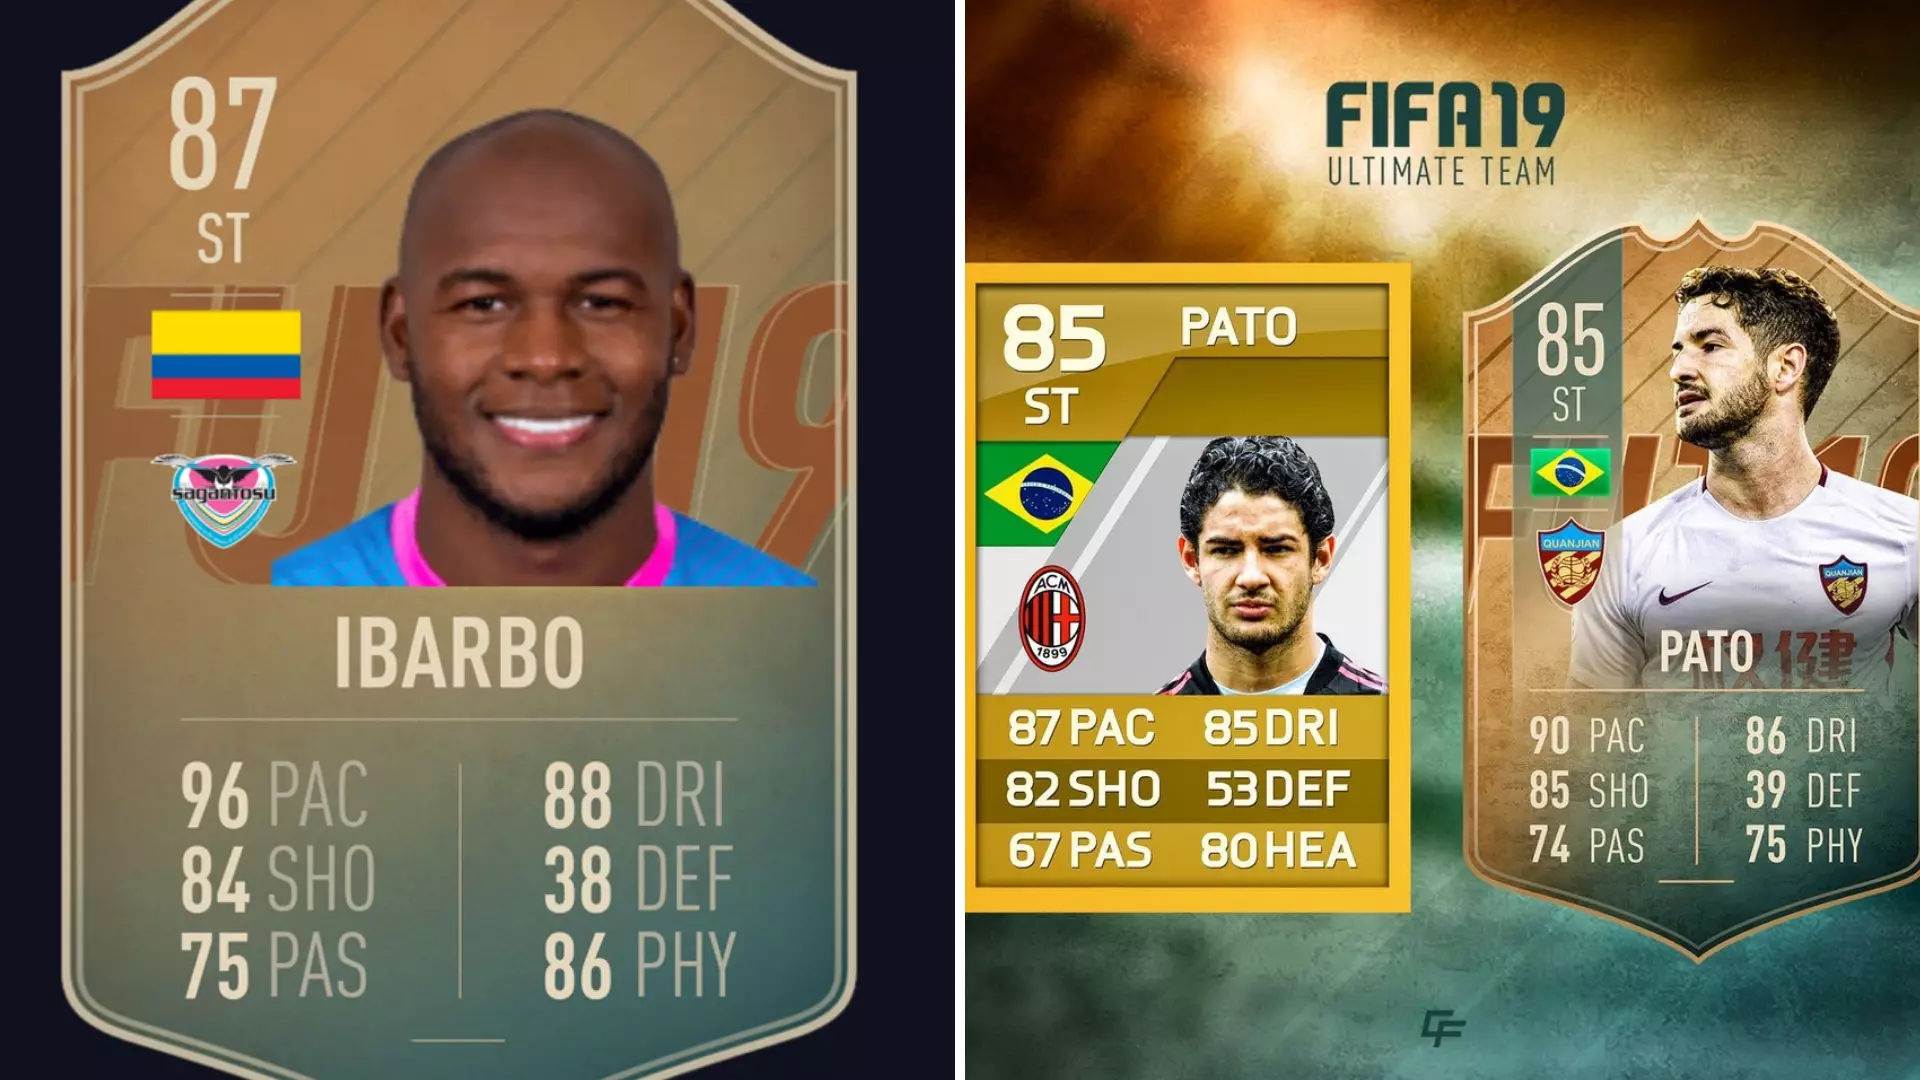 FIFA 19 Fans Are Going Crazy For Ultimate Team ‘Flashback’ Cards From Previous Games